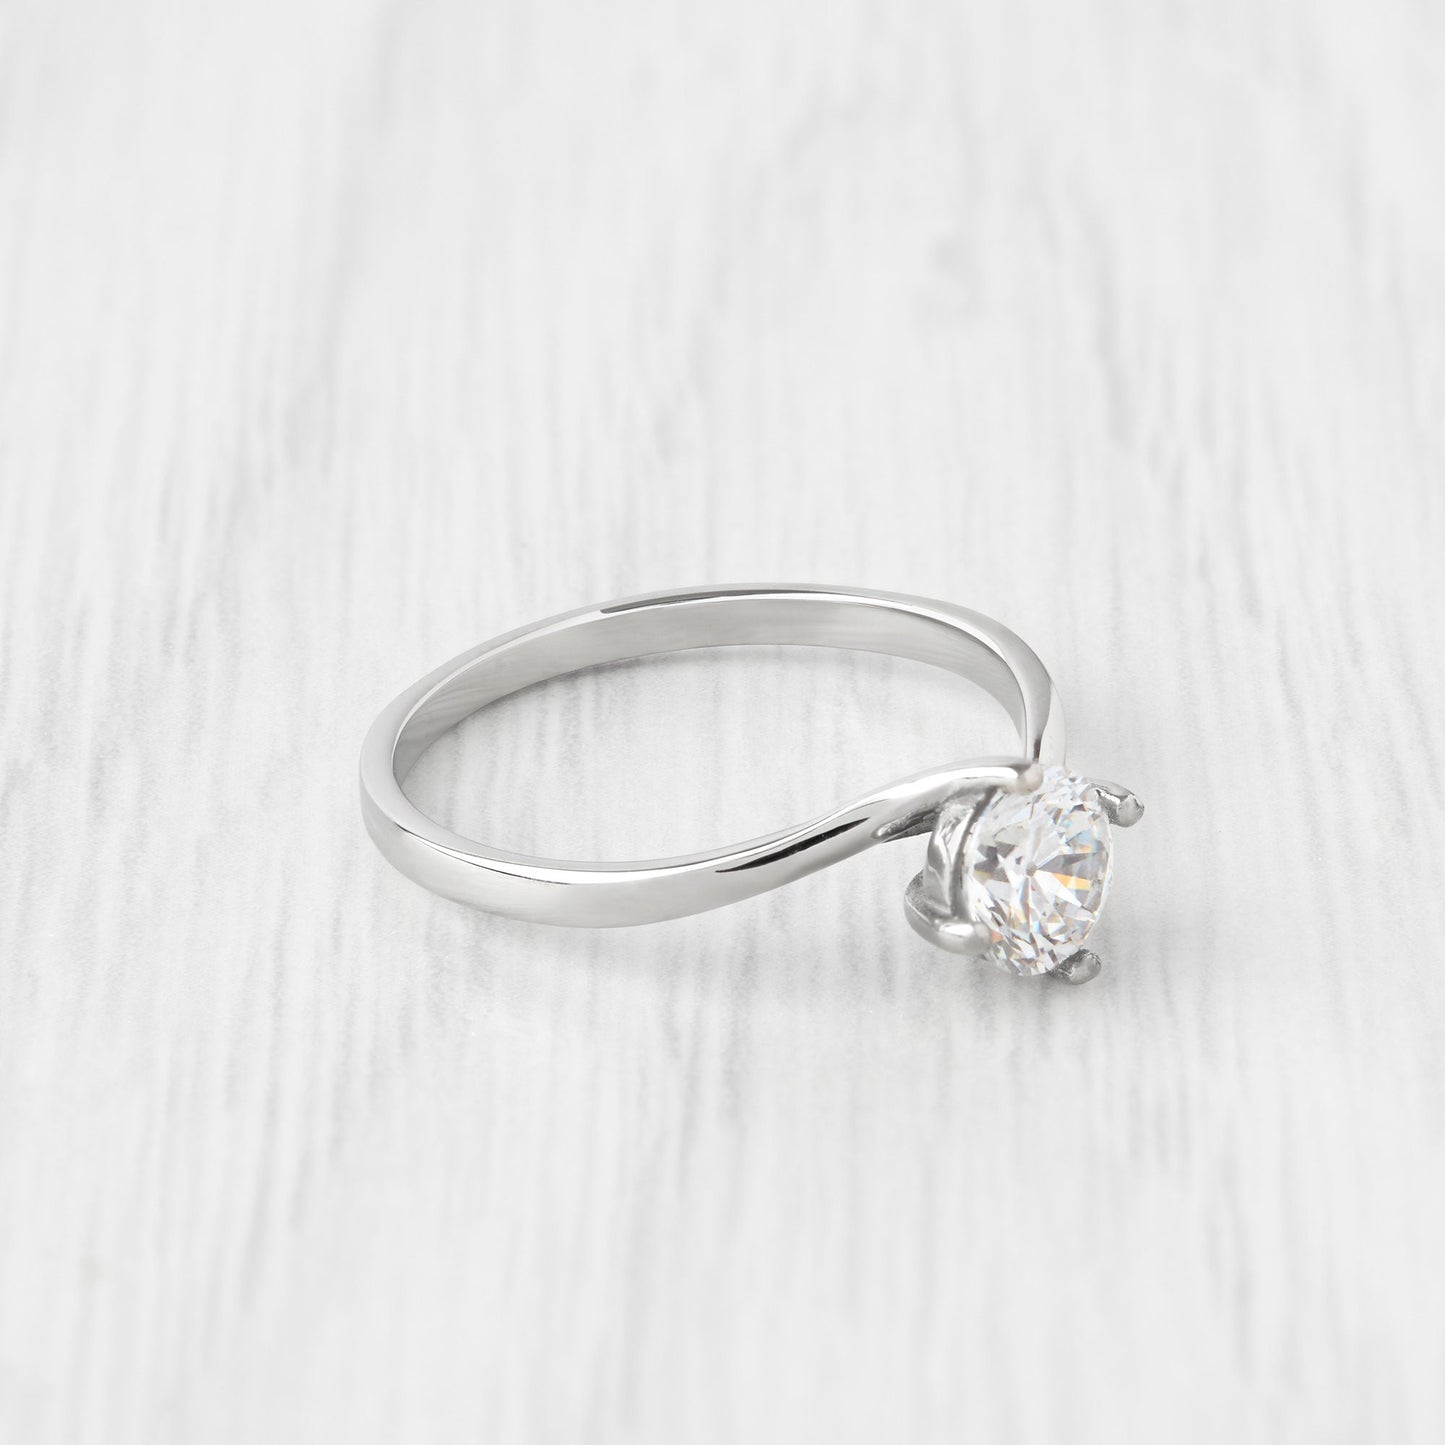 1ct Old European Diamond Simulant solitaire ring in Titanium or White Gold - engagement ring - wedding ring - handmade ring